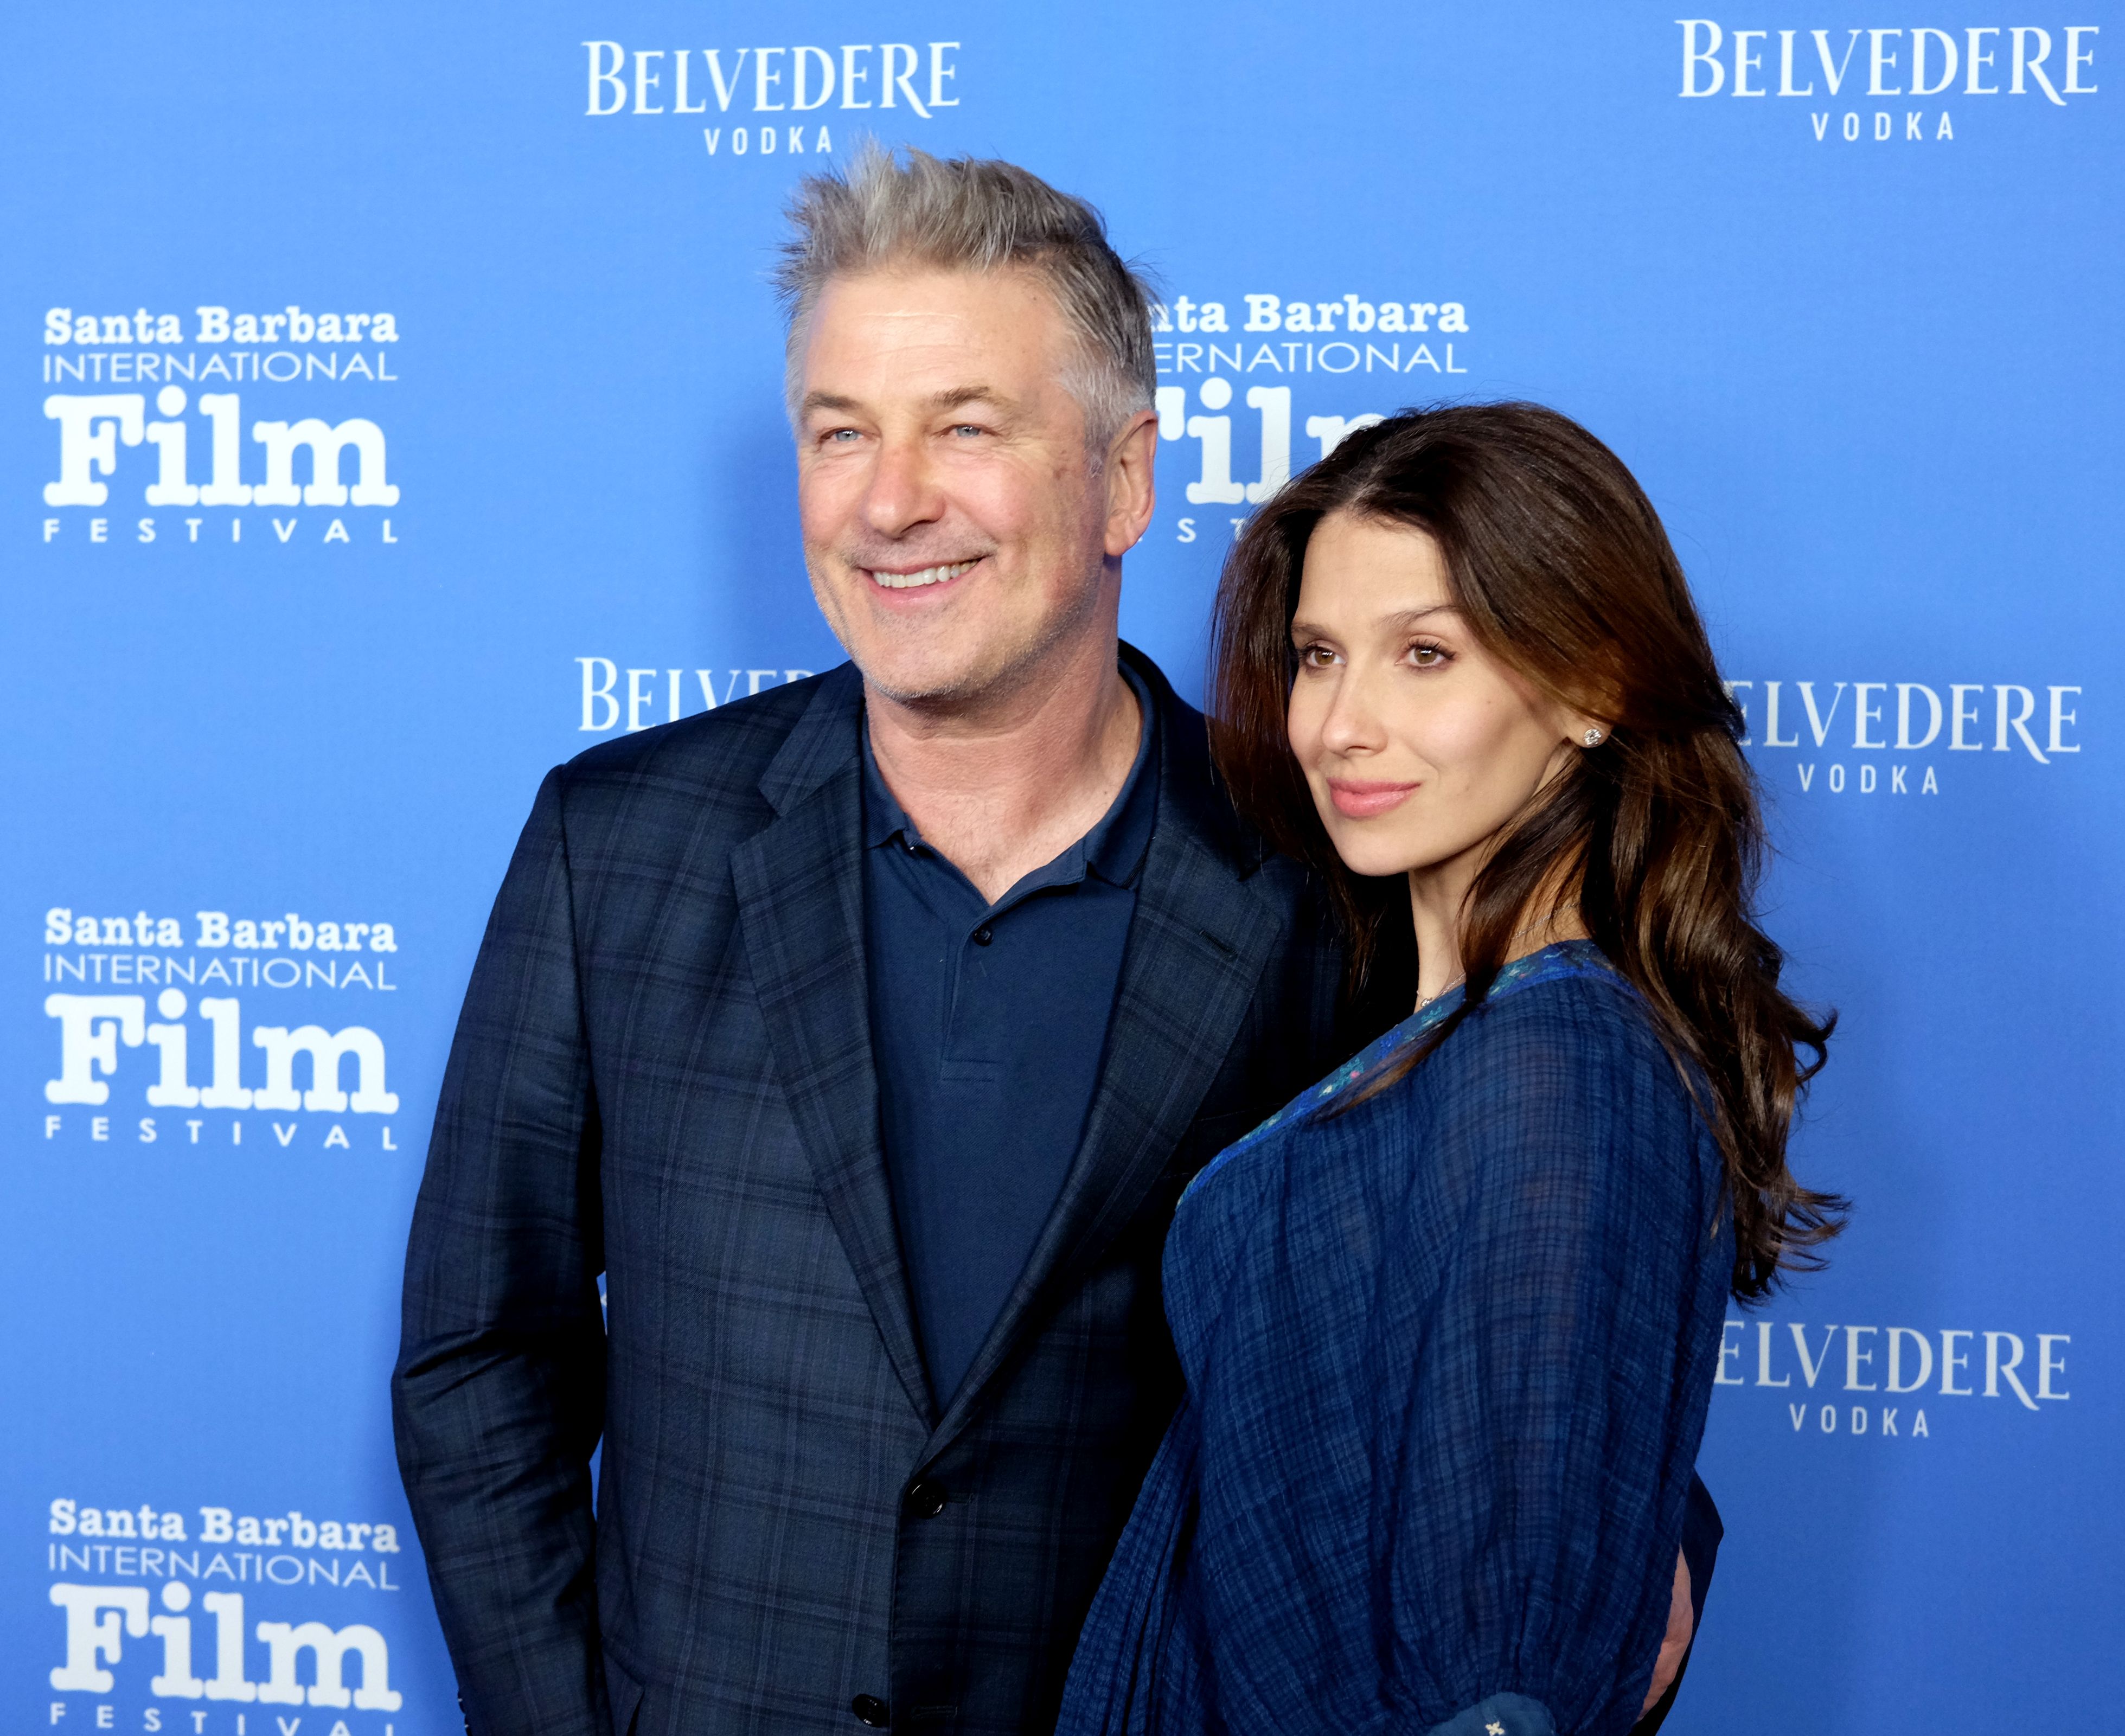 Alec Baldwin and Hilaria Baldwin at the Opening Night Film "The Public" during the 33rd Santa Barbara International Film Festival at Arlington Theatre on January 31, 2018 | Photo: Getty Images